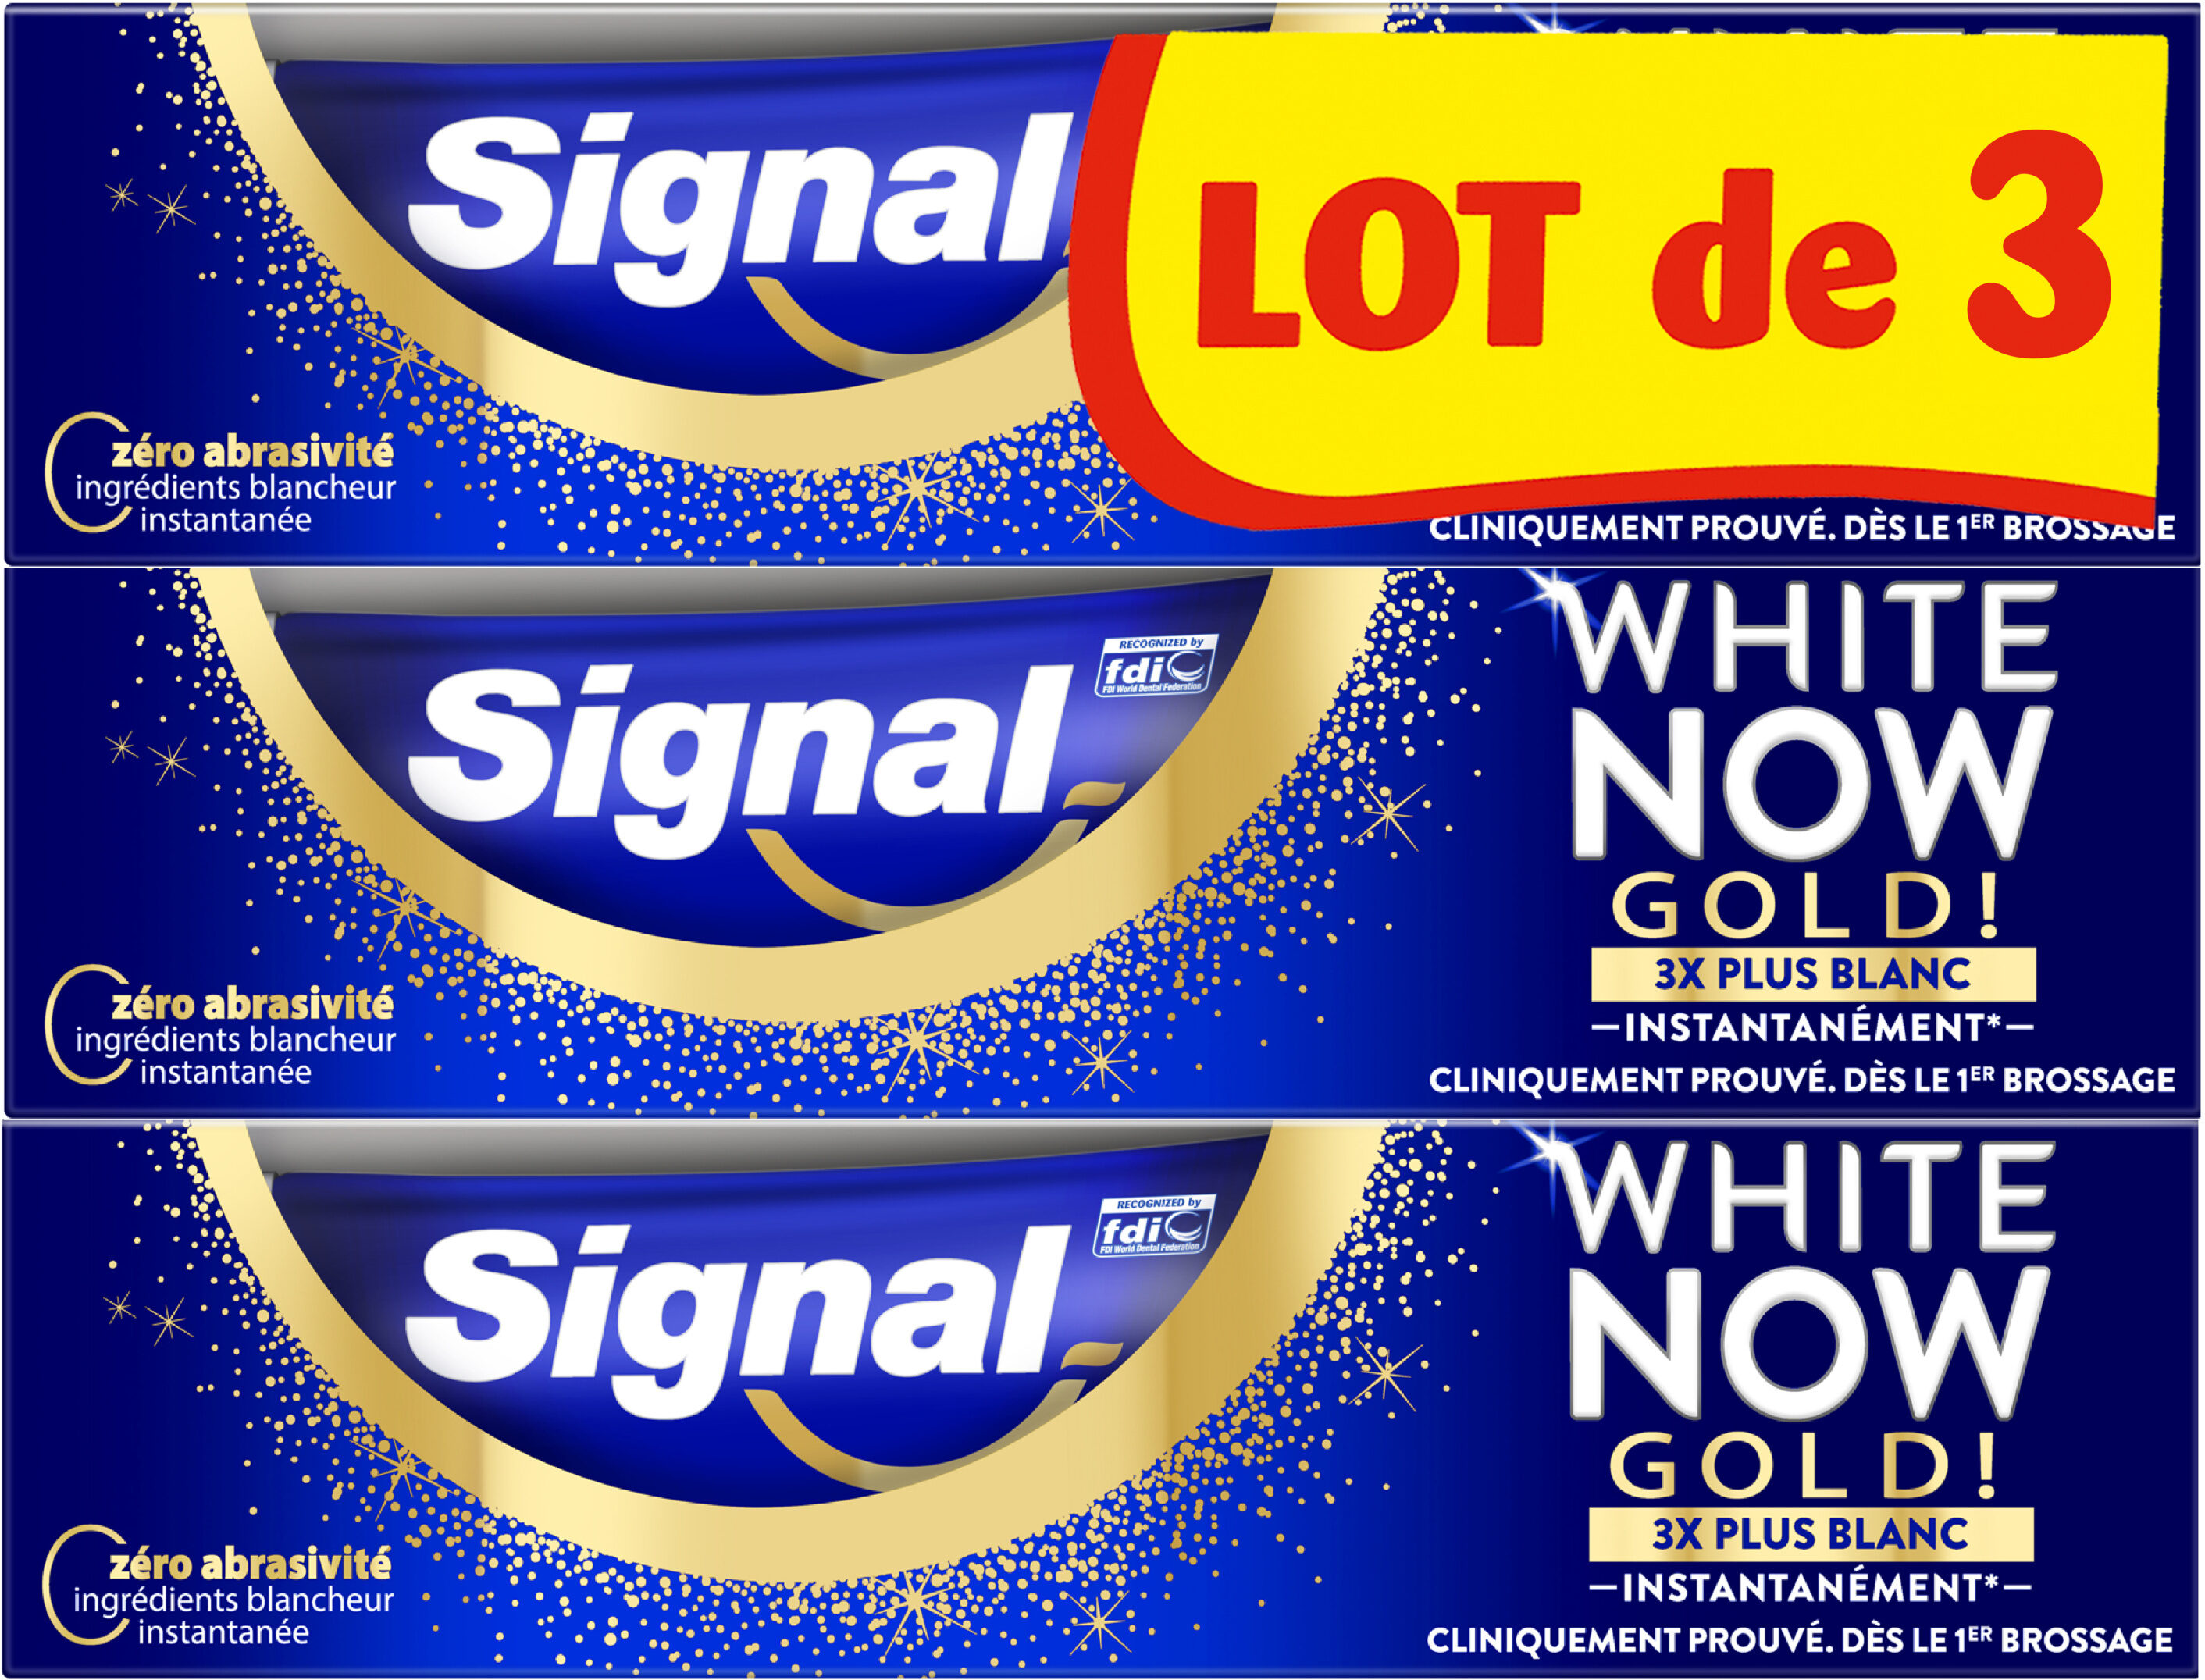 Signal wh now gold lotx3 - Product - fr